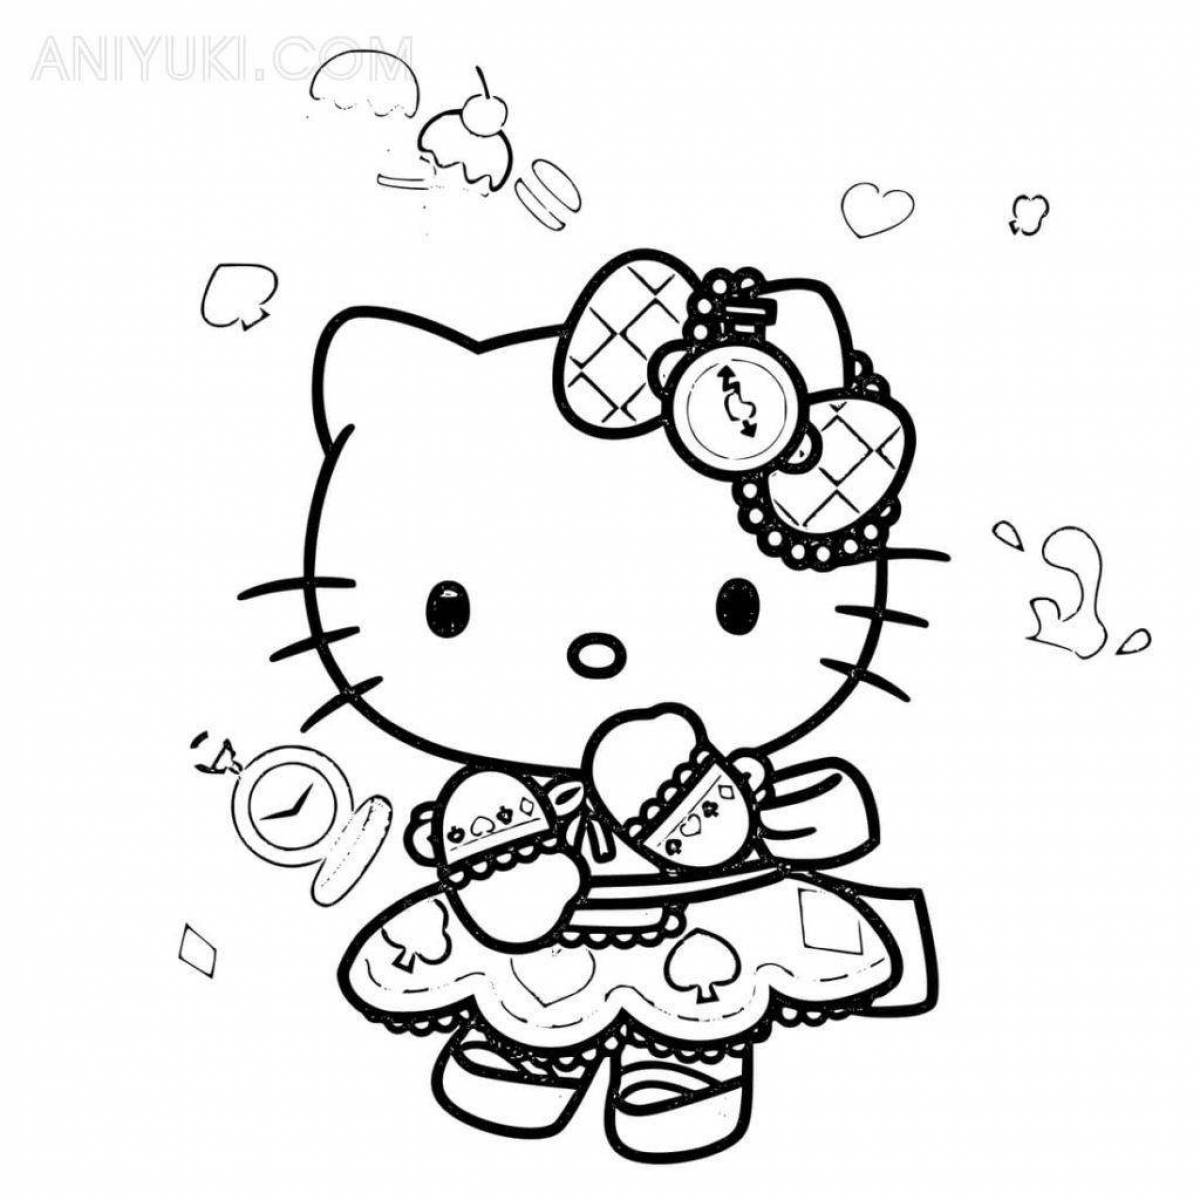 Exquisite hello kitty money coloring book